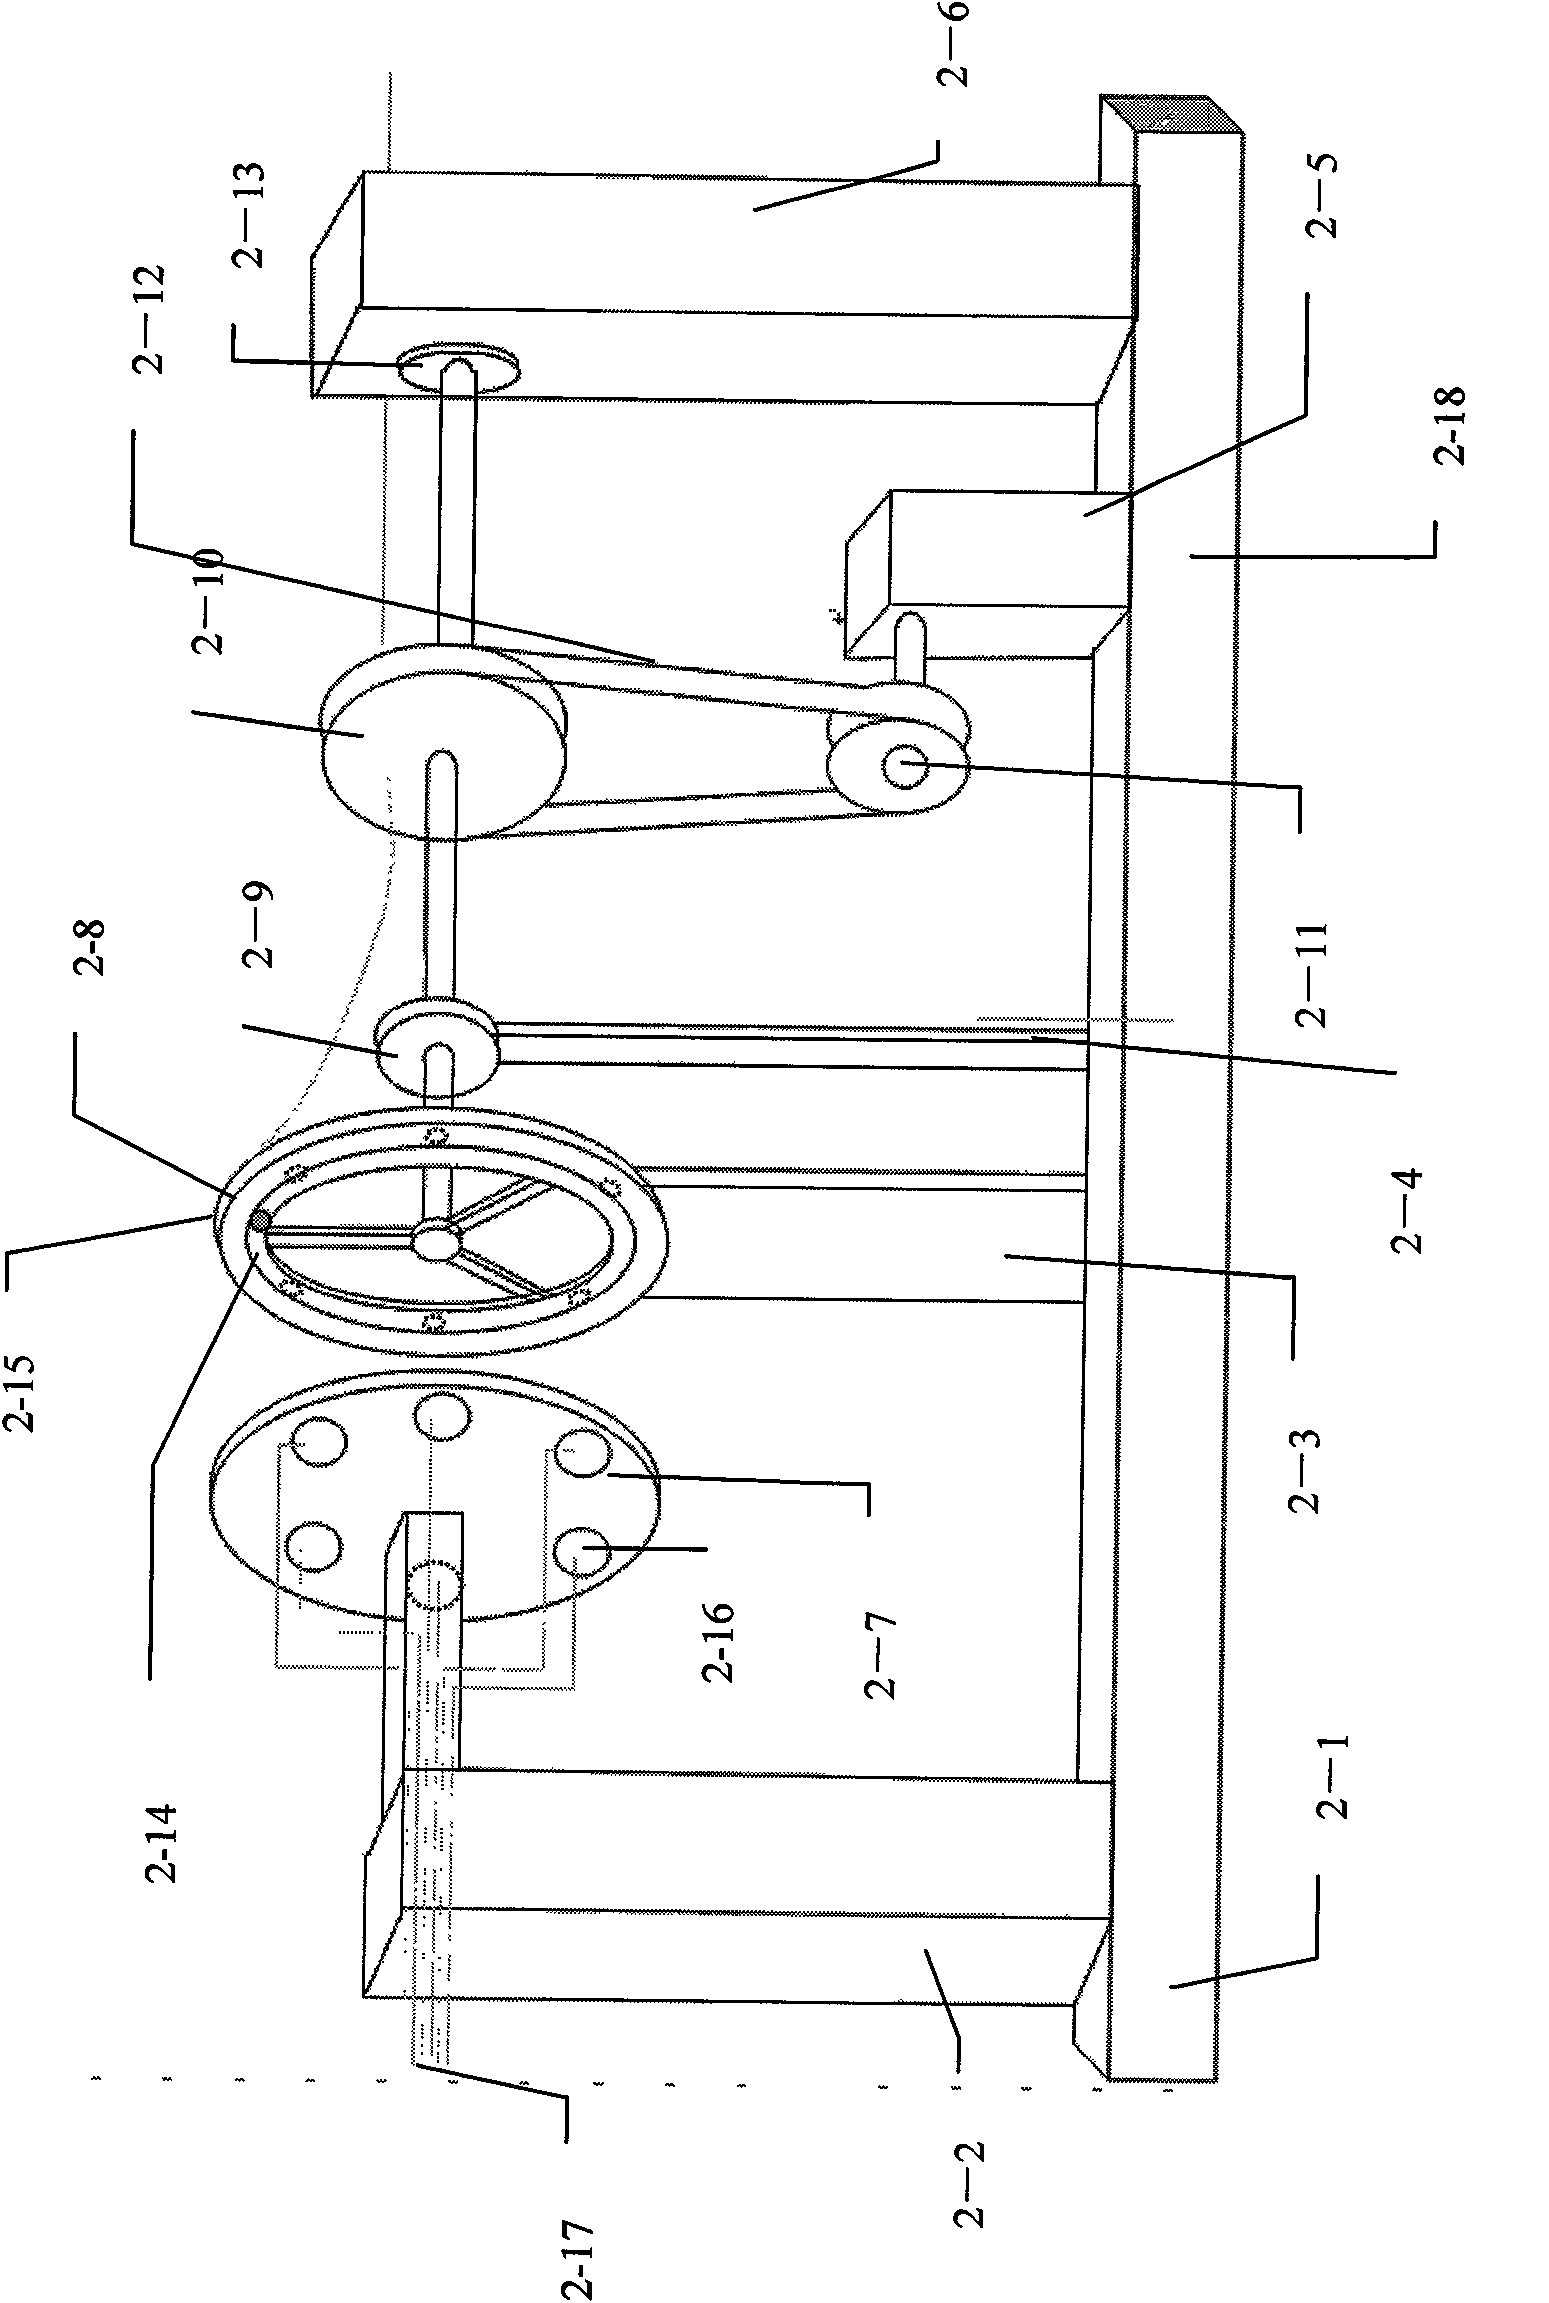 Device for automatically testing optical waveguide devices in batches